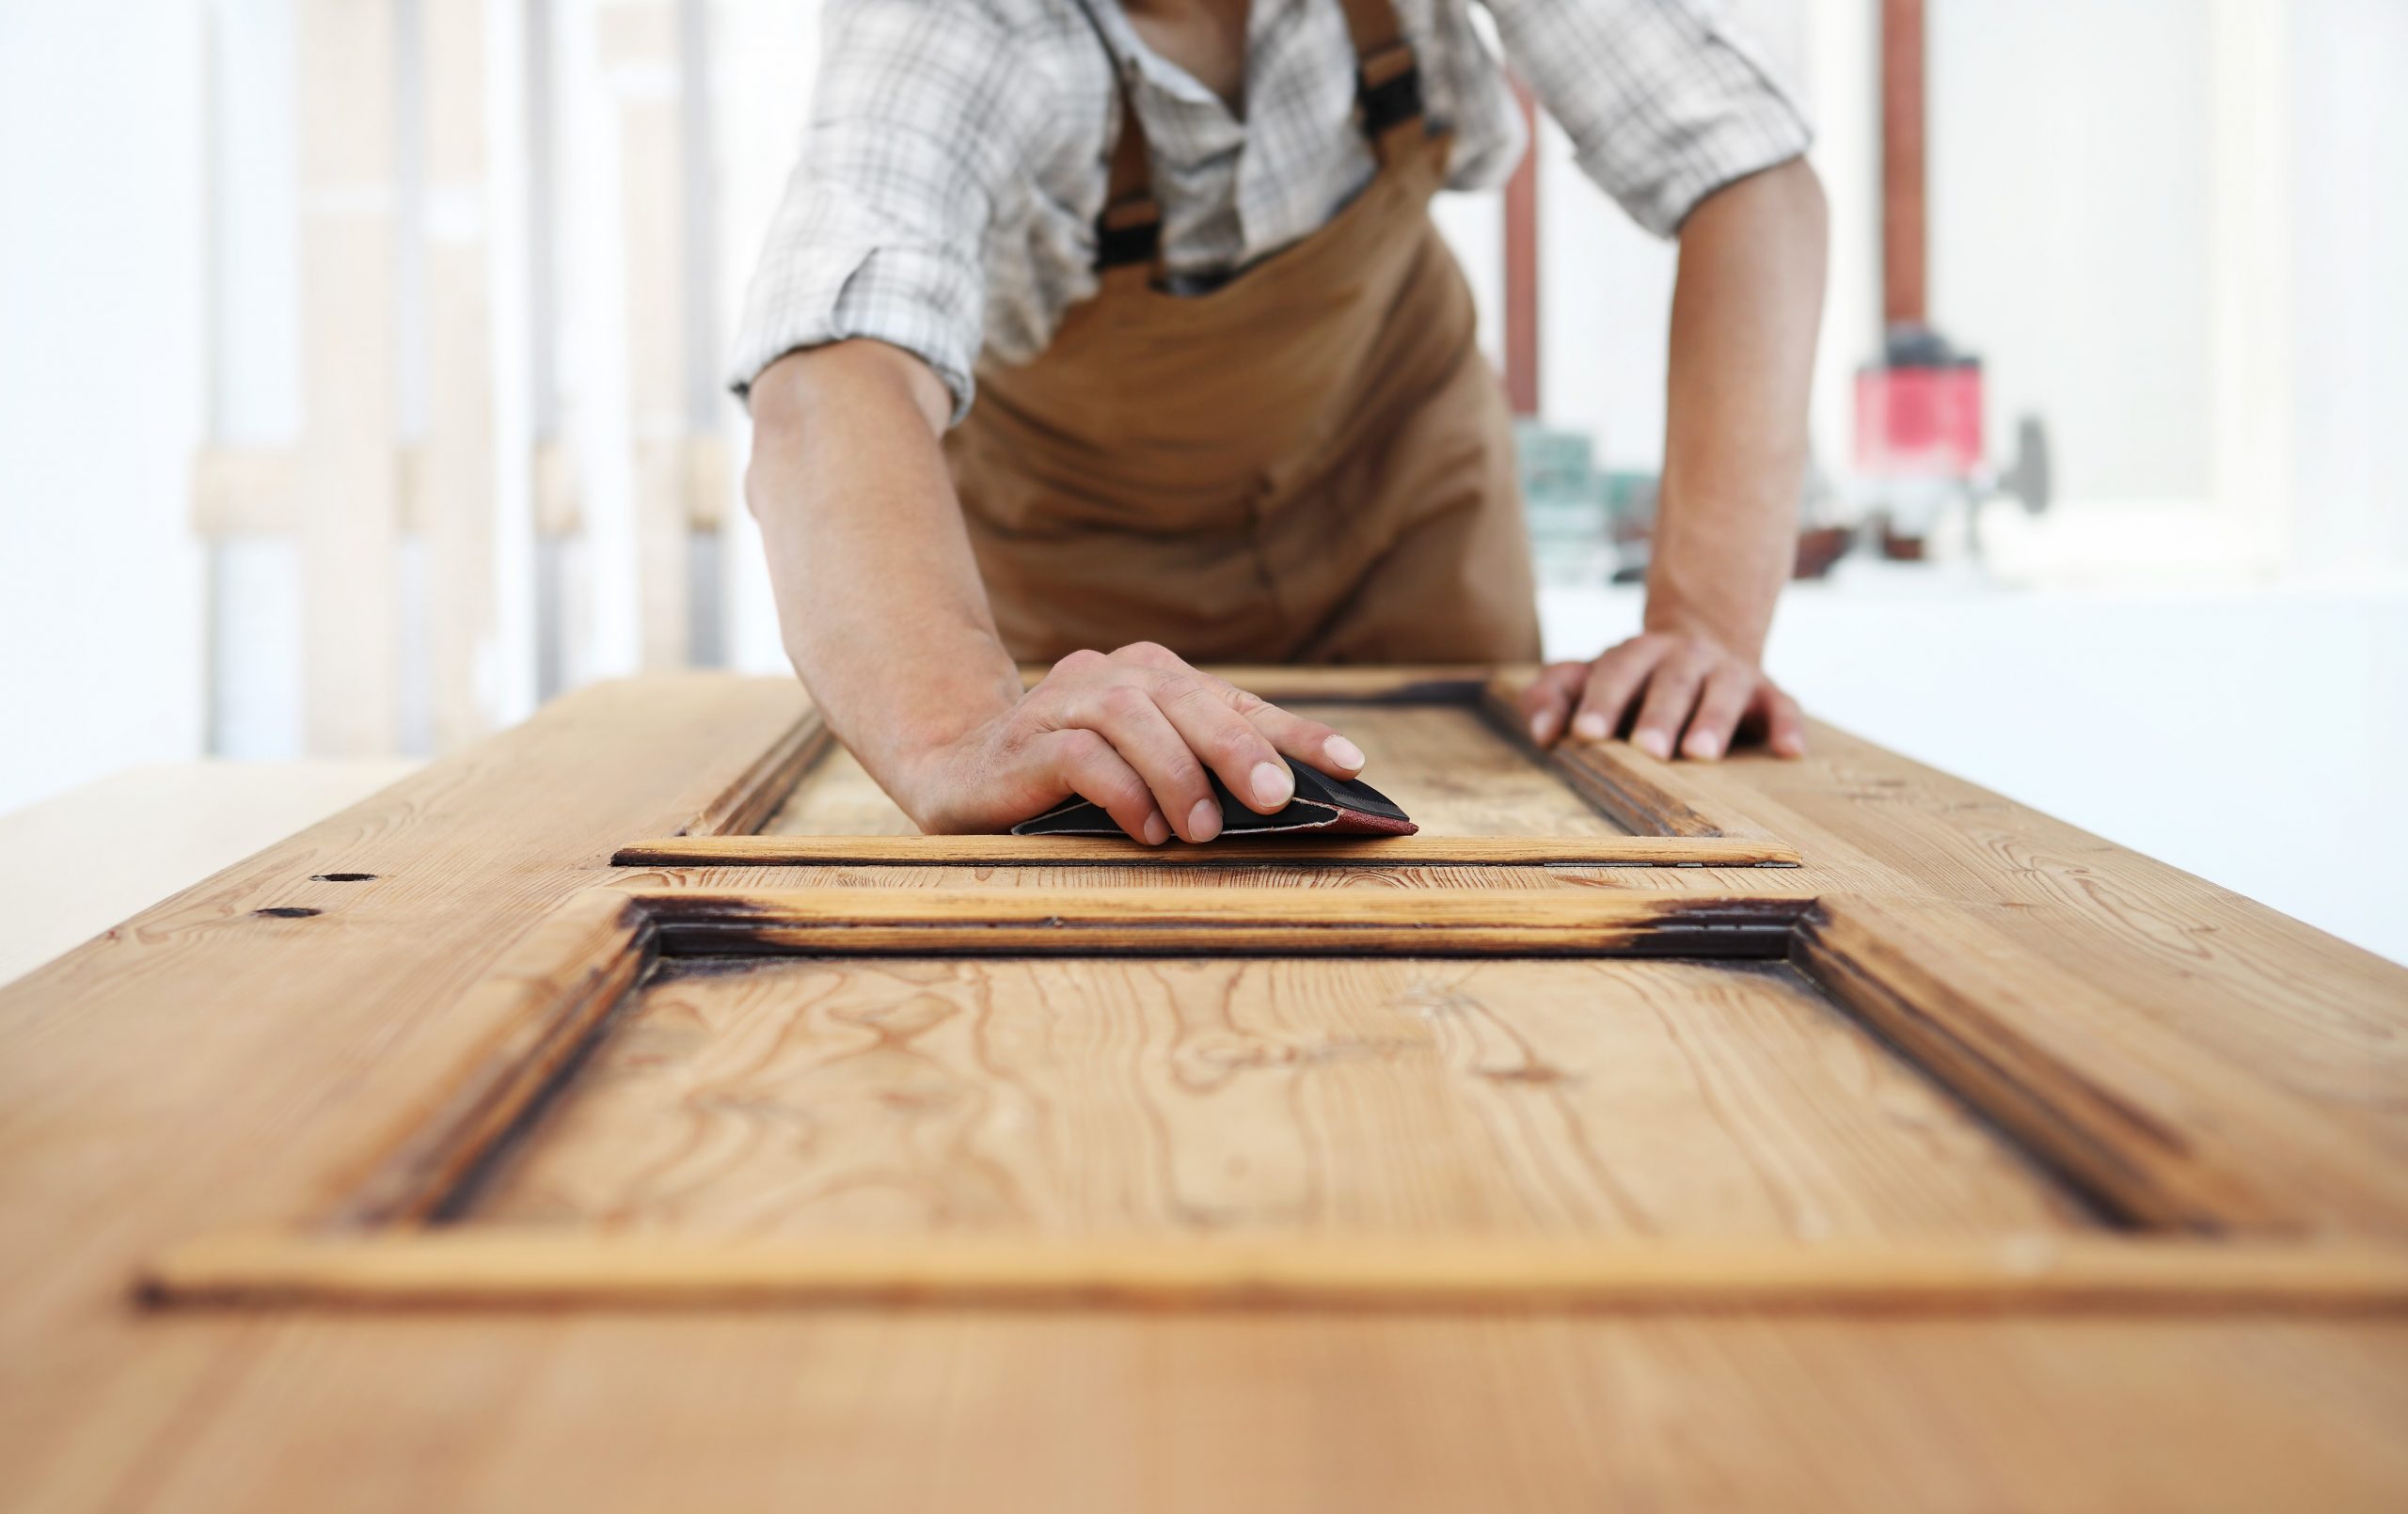 How to Paint Wooden Windows and Doors